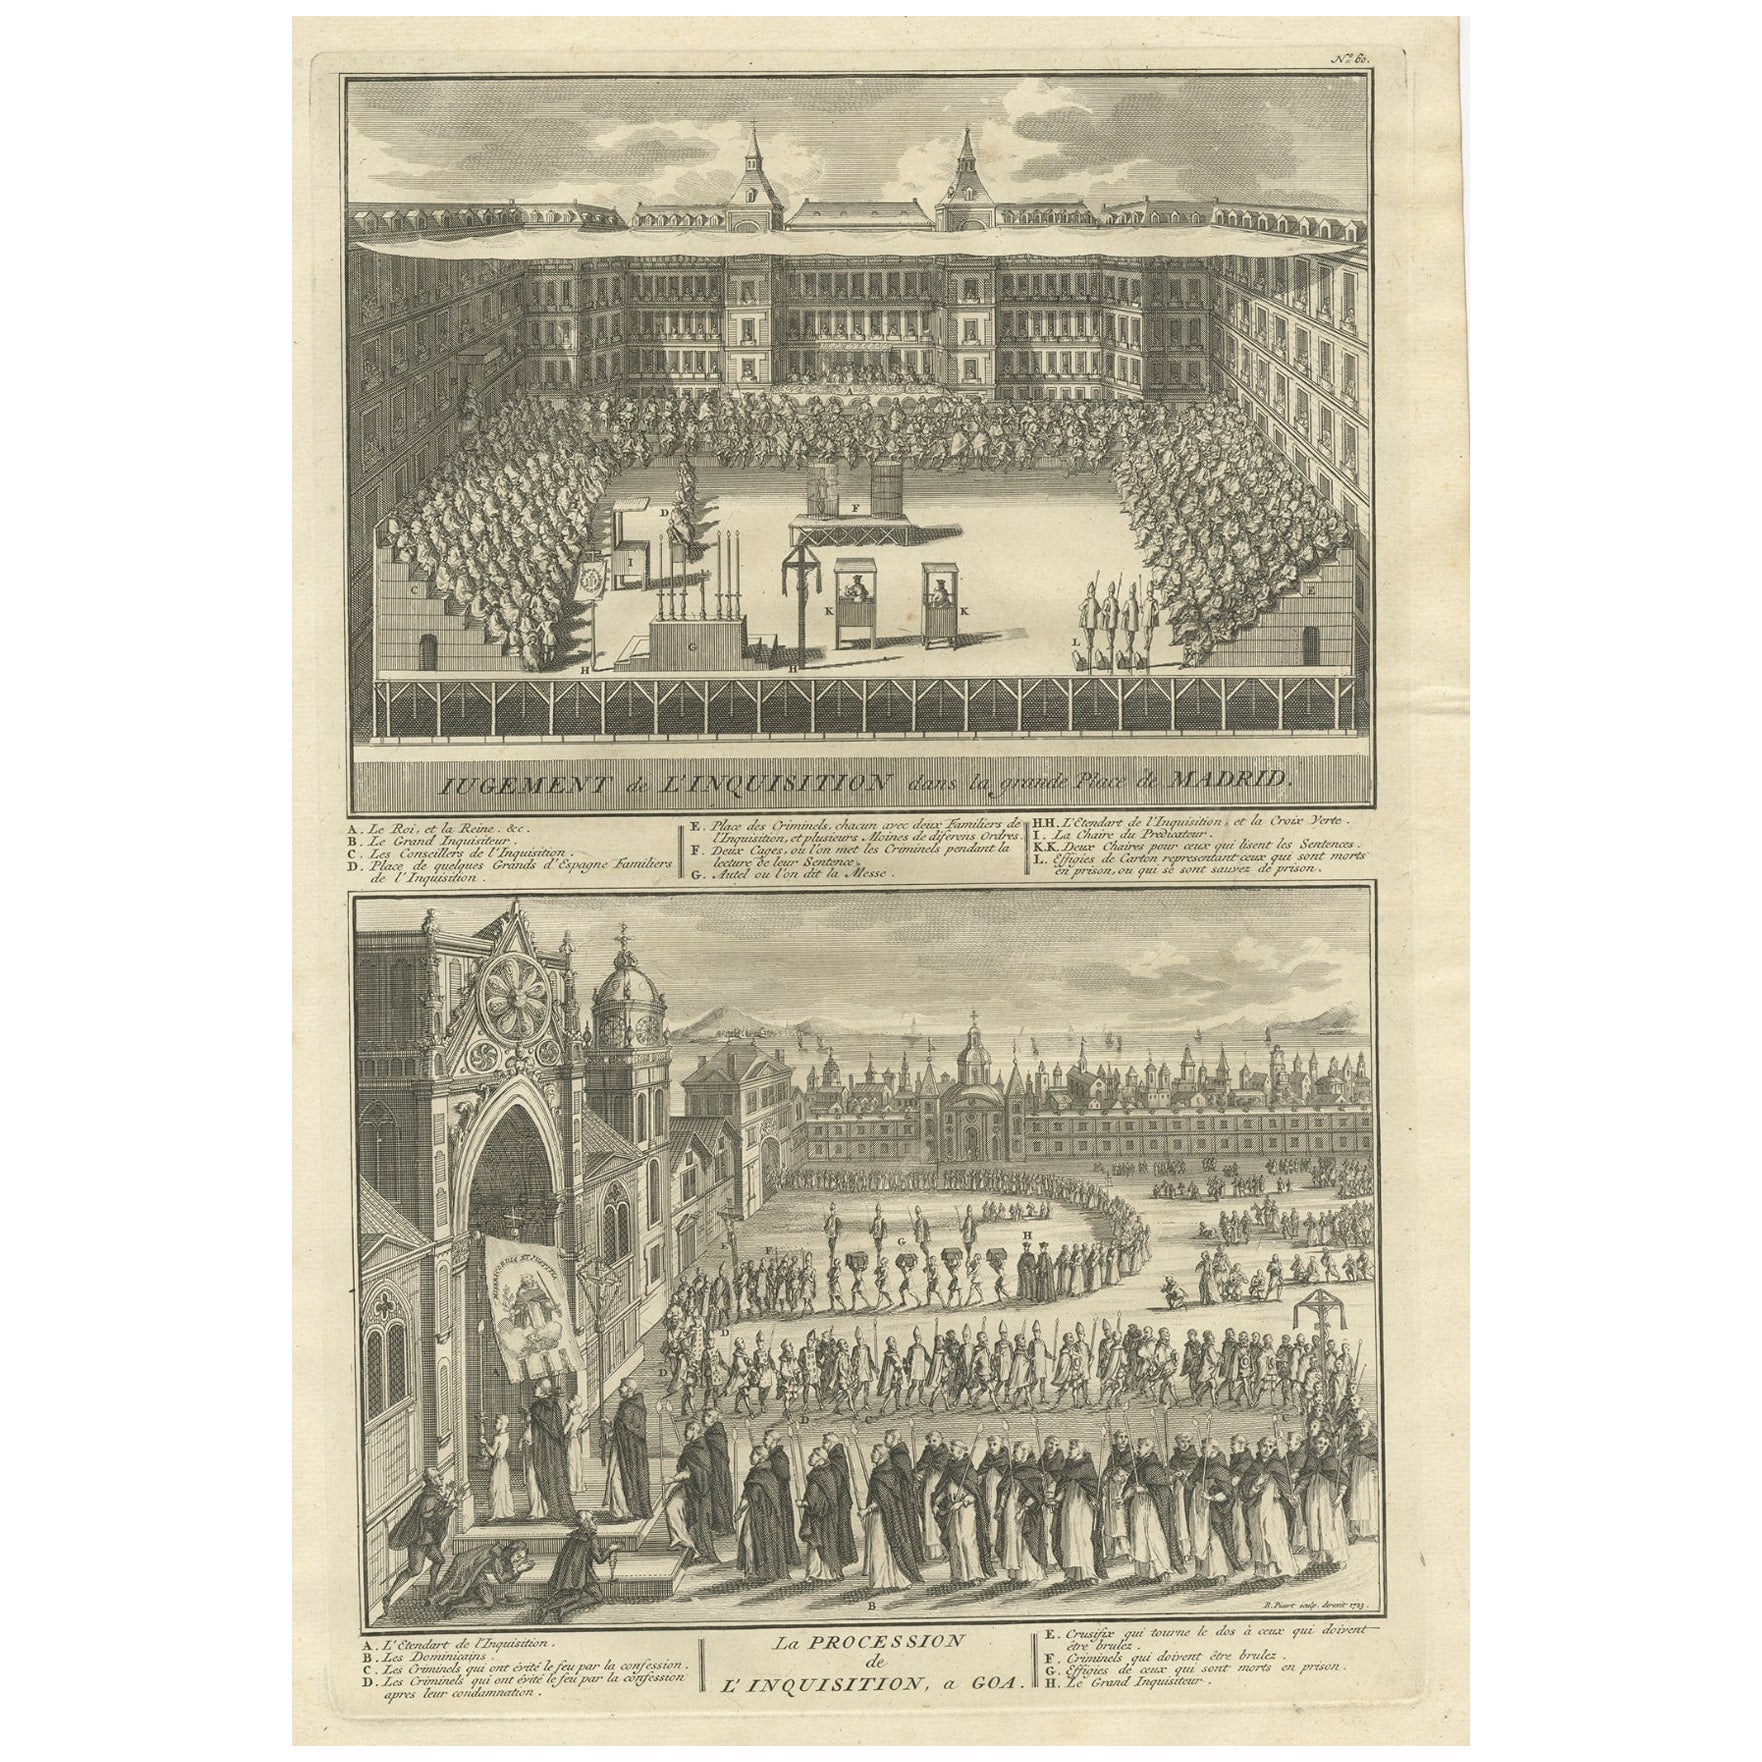 Antique Print of Spanish Inquisitions in Madrid and Goa by Picart, 1723